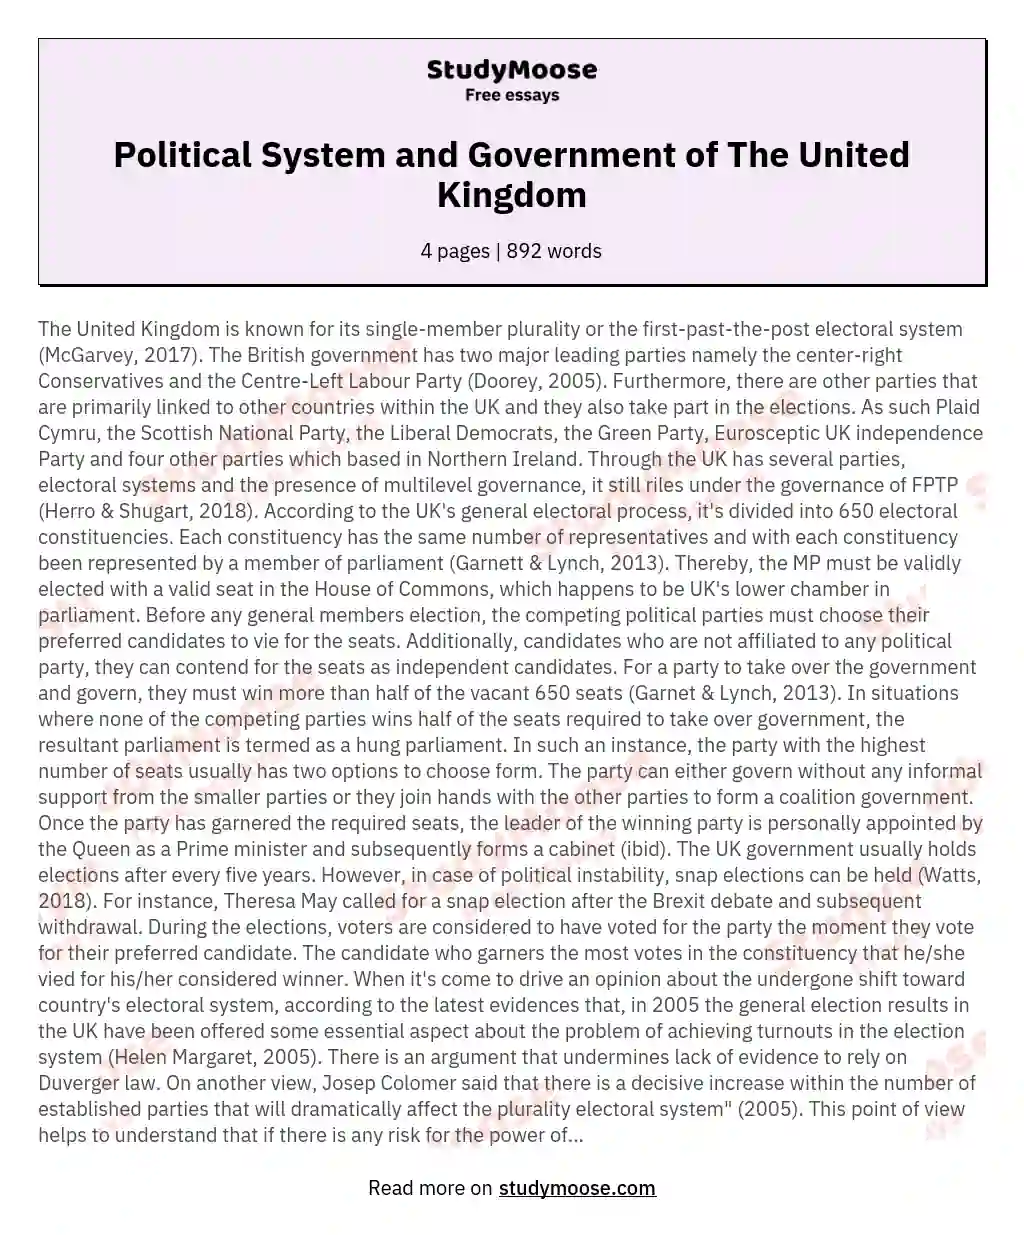 Political System and Government of The United Kingdom